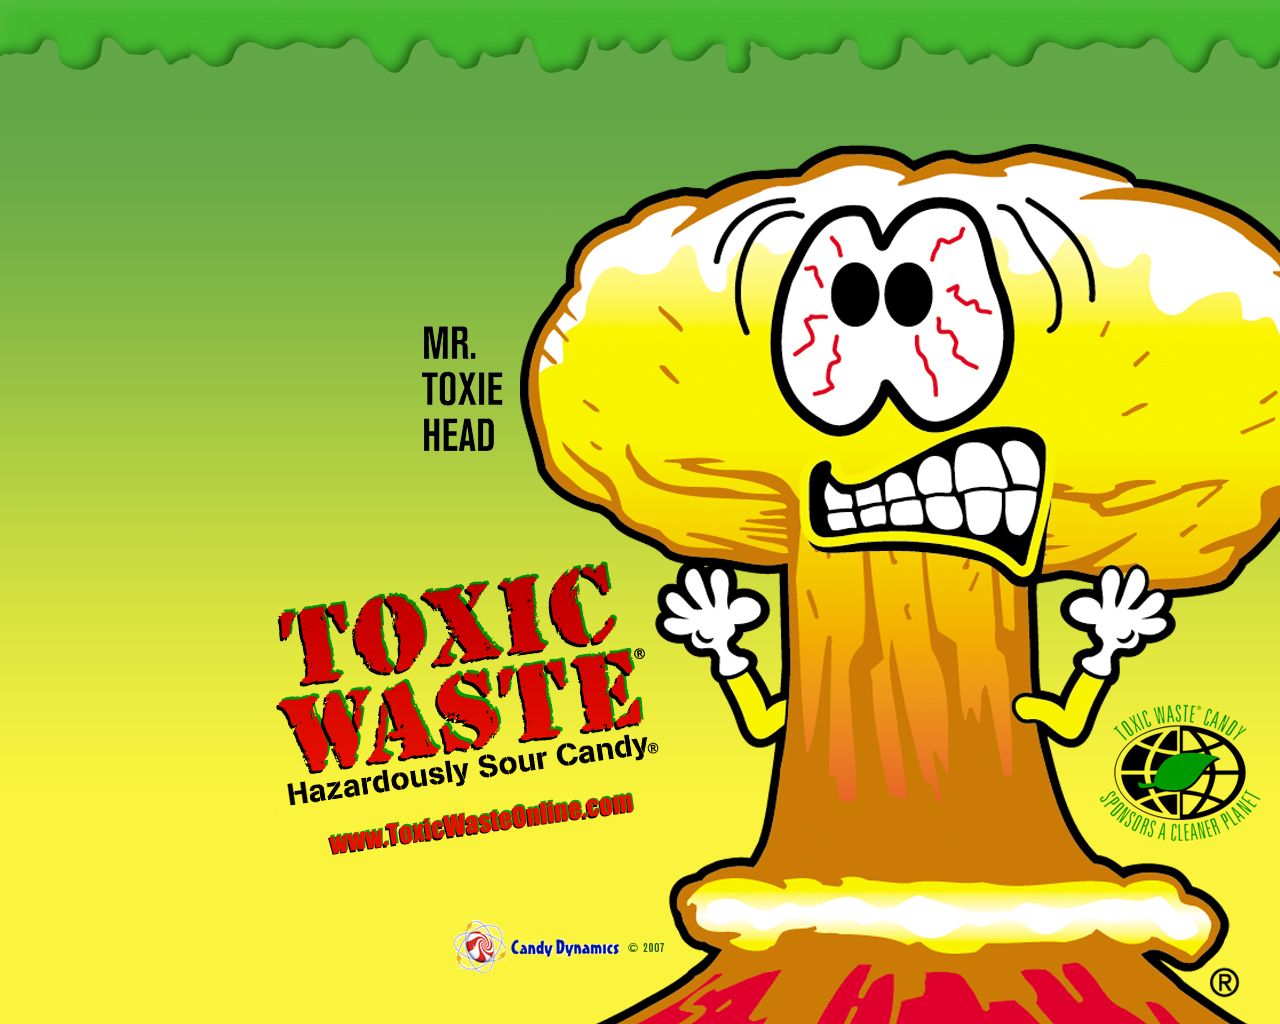 Take The Handle Toxic Waste Candy is Actually Toxic